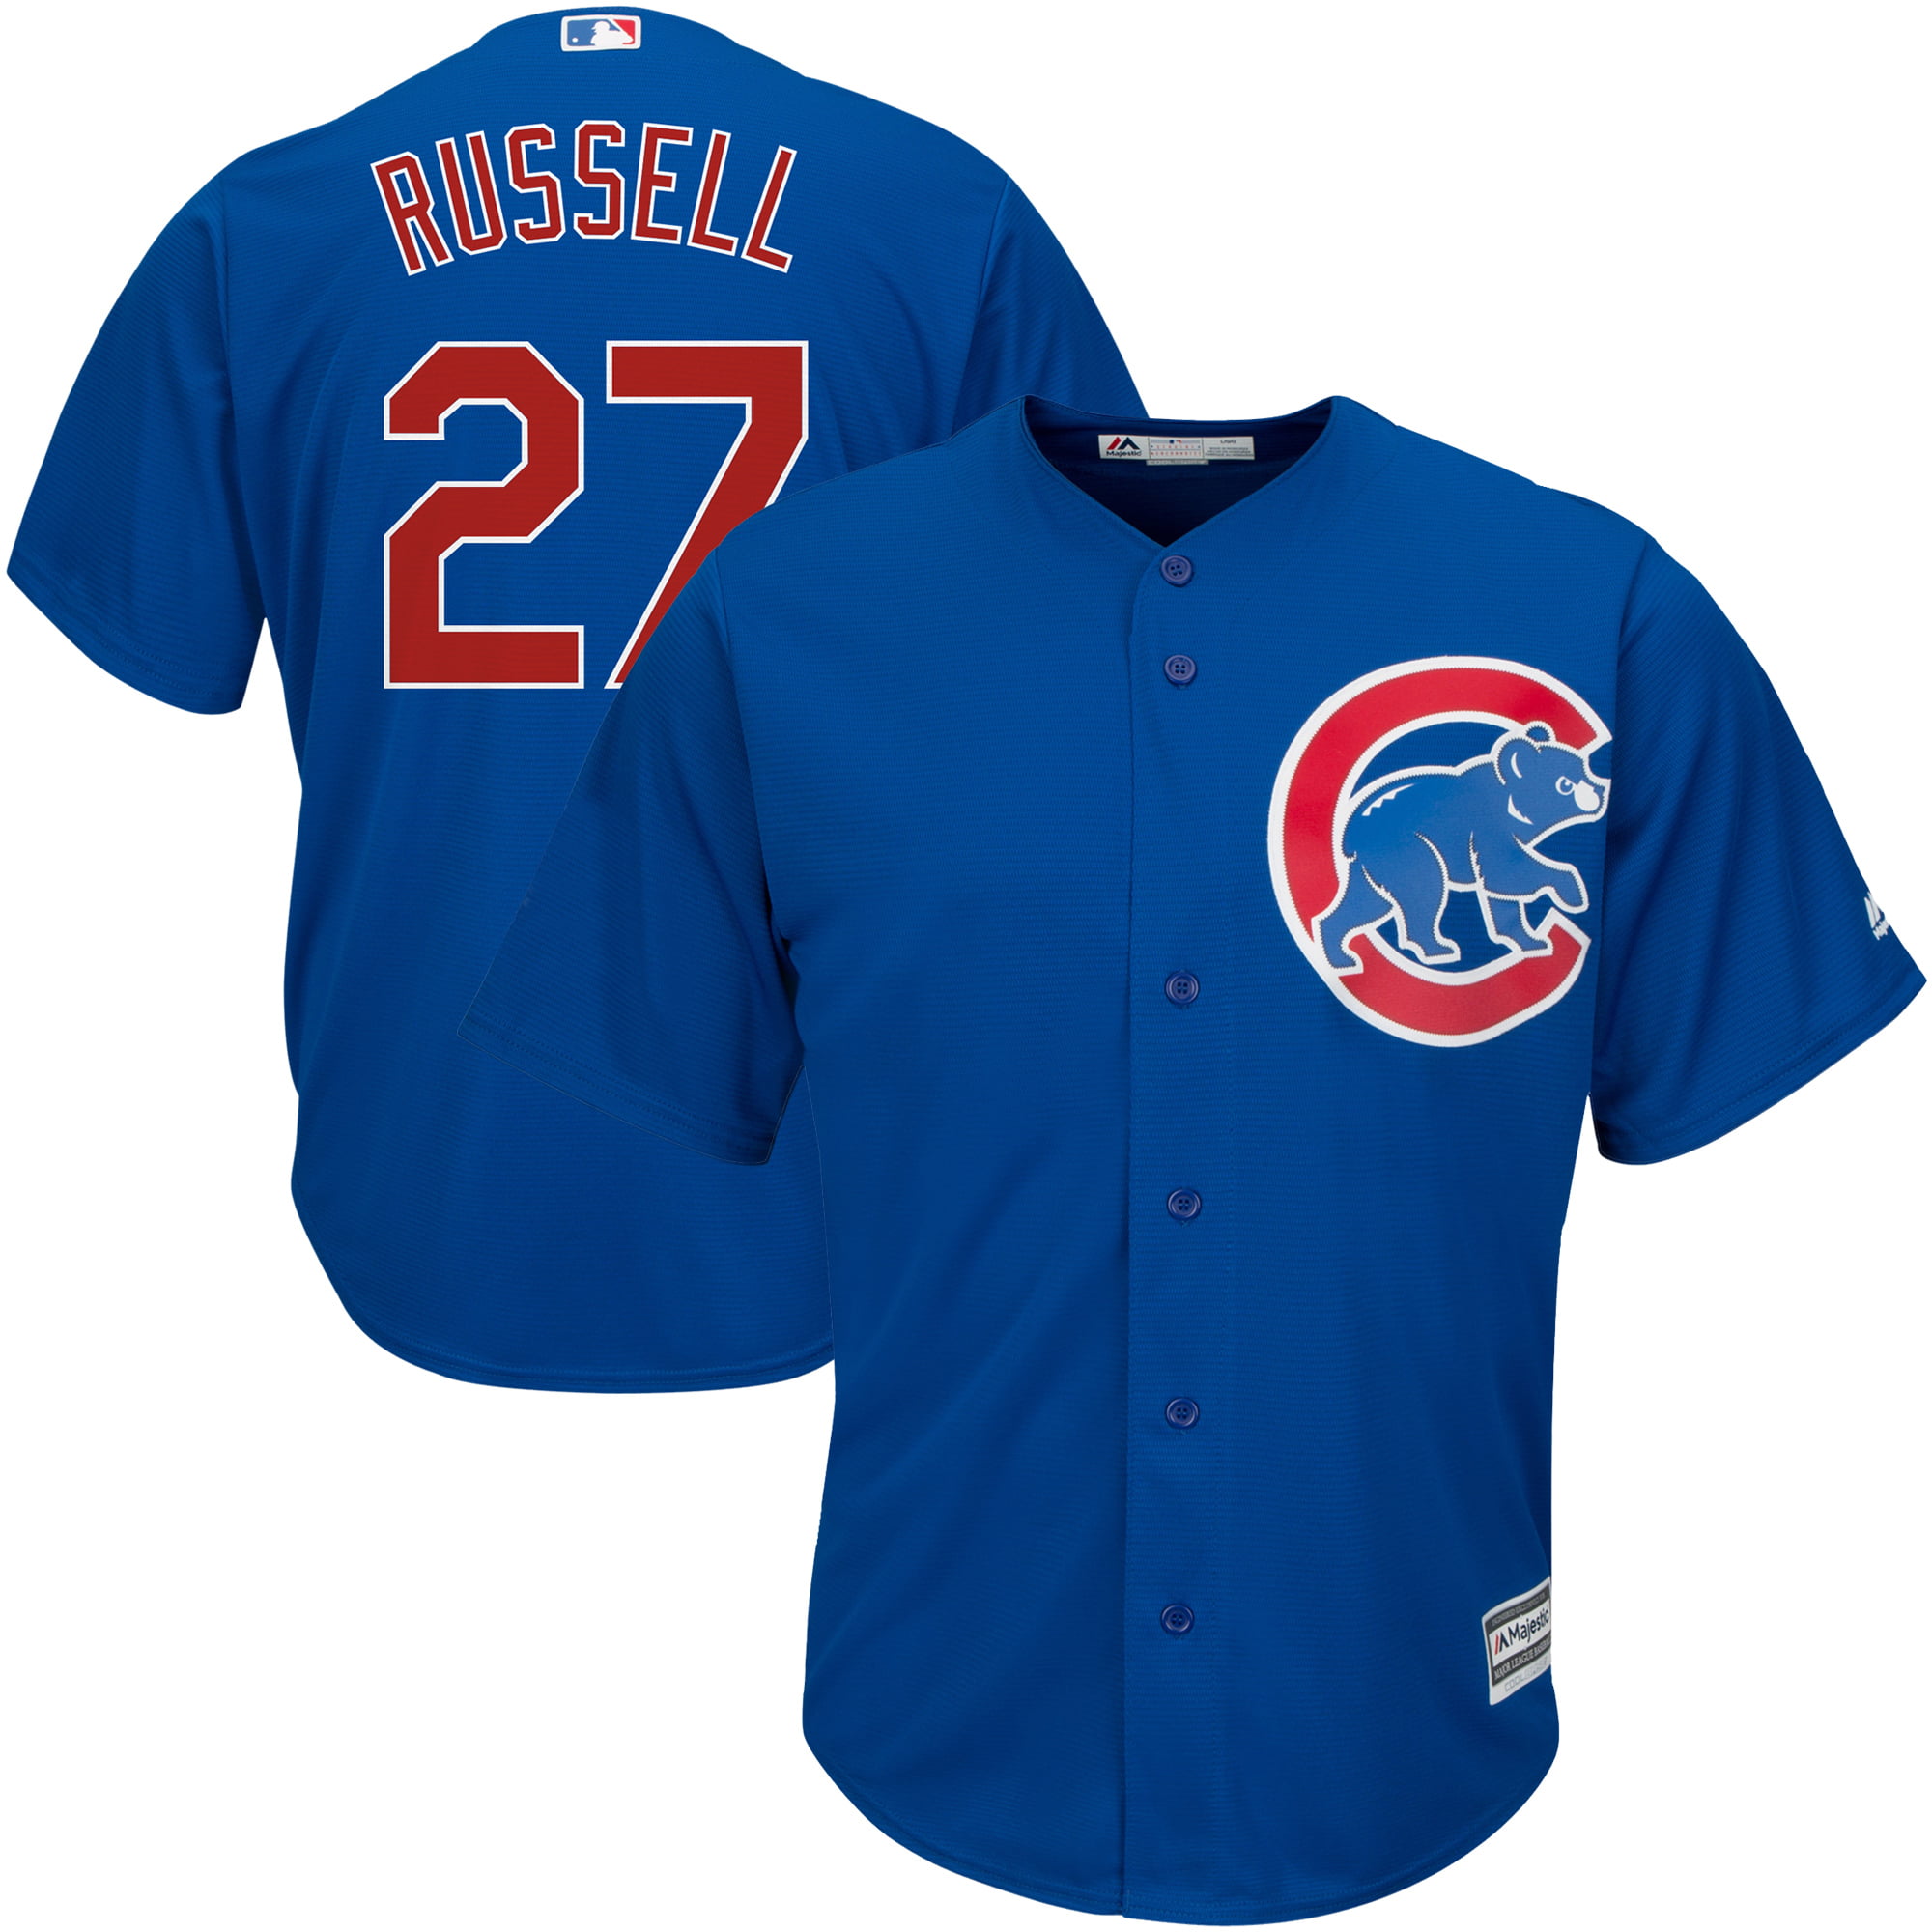 addison russell jersey